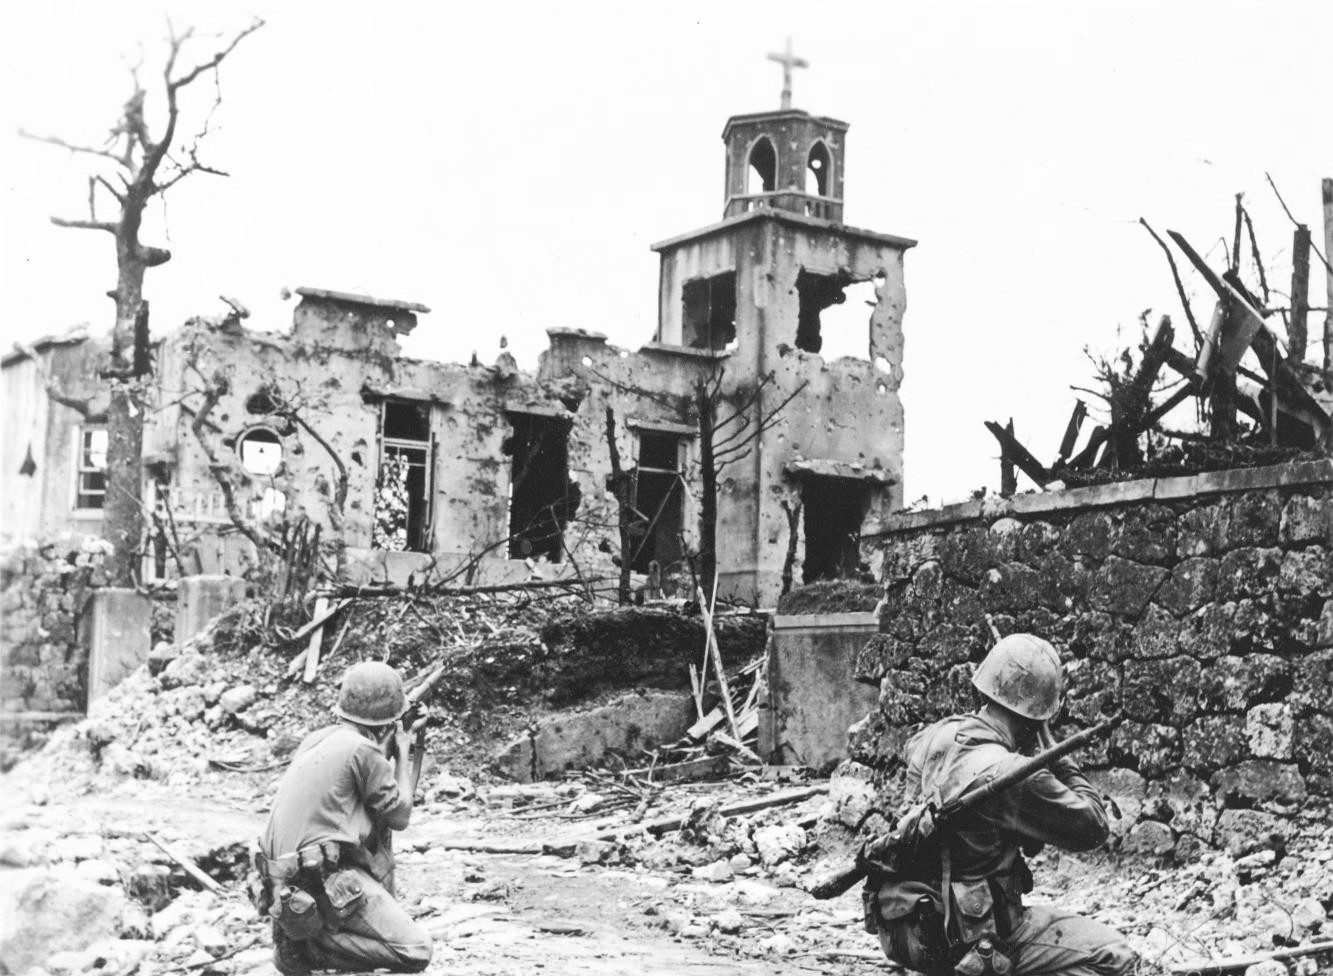 US Marines aiming at a church suspected of being a Japanese position, Okinawa, Japan, 1945